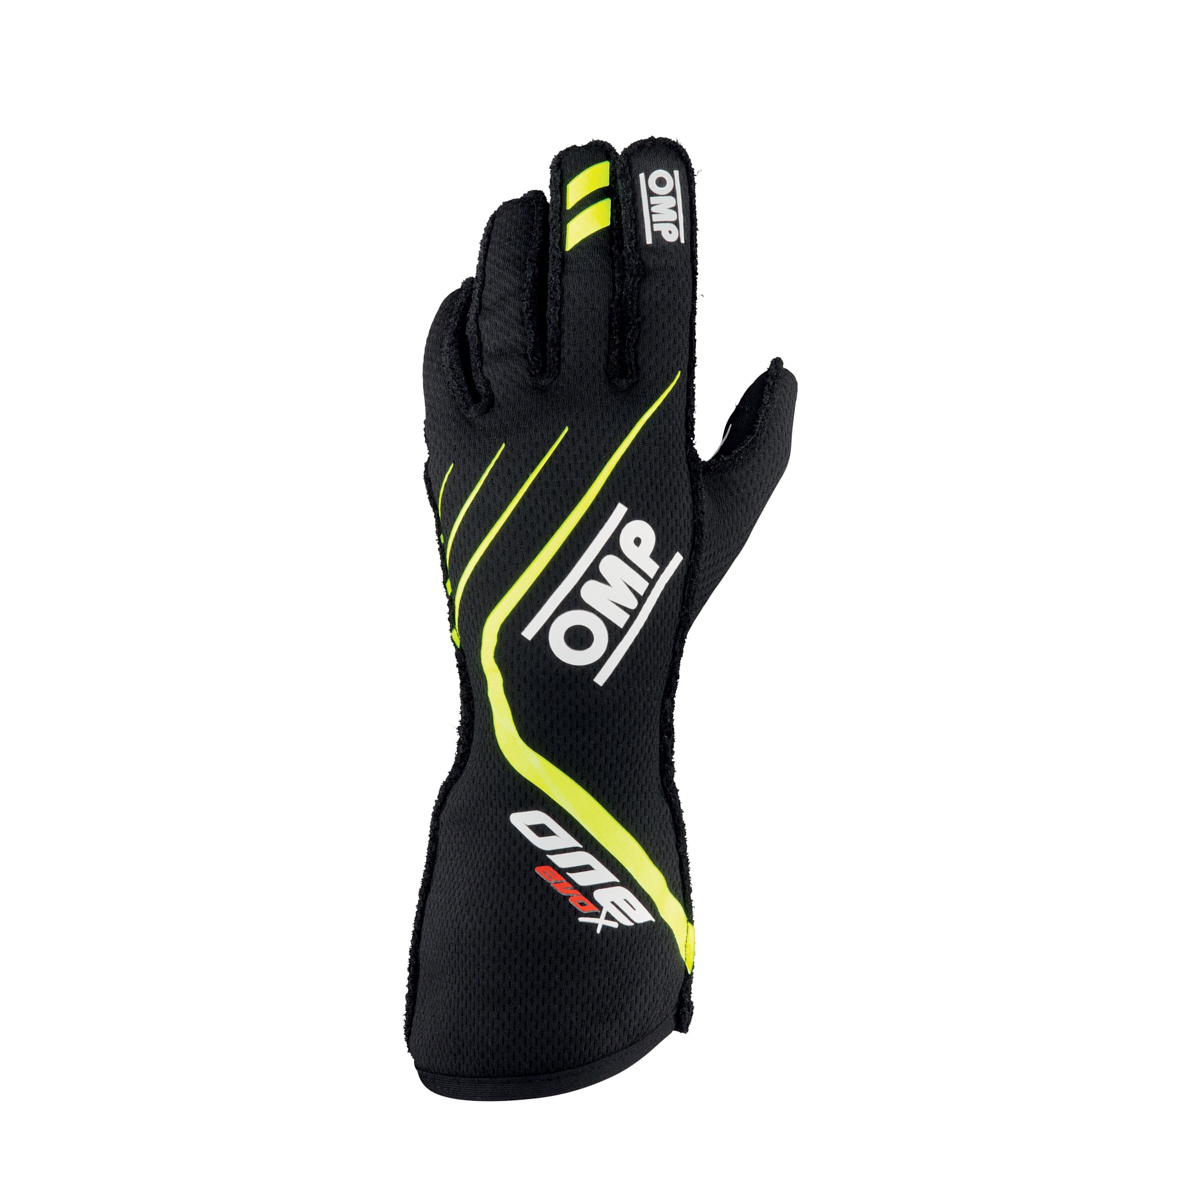 OMP Racing IB771NGIS Driving Gloves, One EVO X, FIA Approved, Double Layer, Fire Retardant Fabric, Black / Fluorescent Yellow, Small, Pair